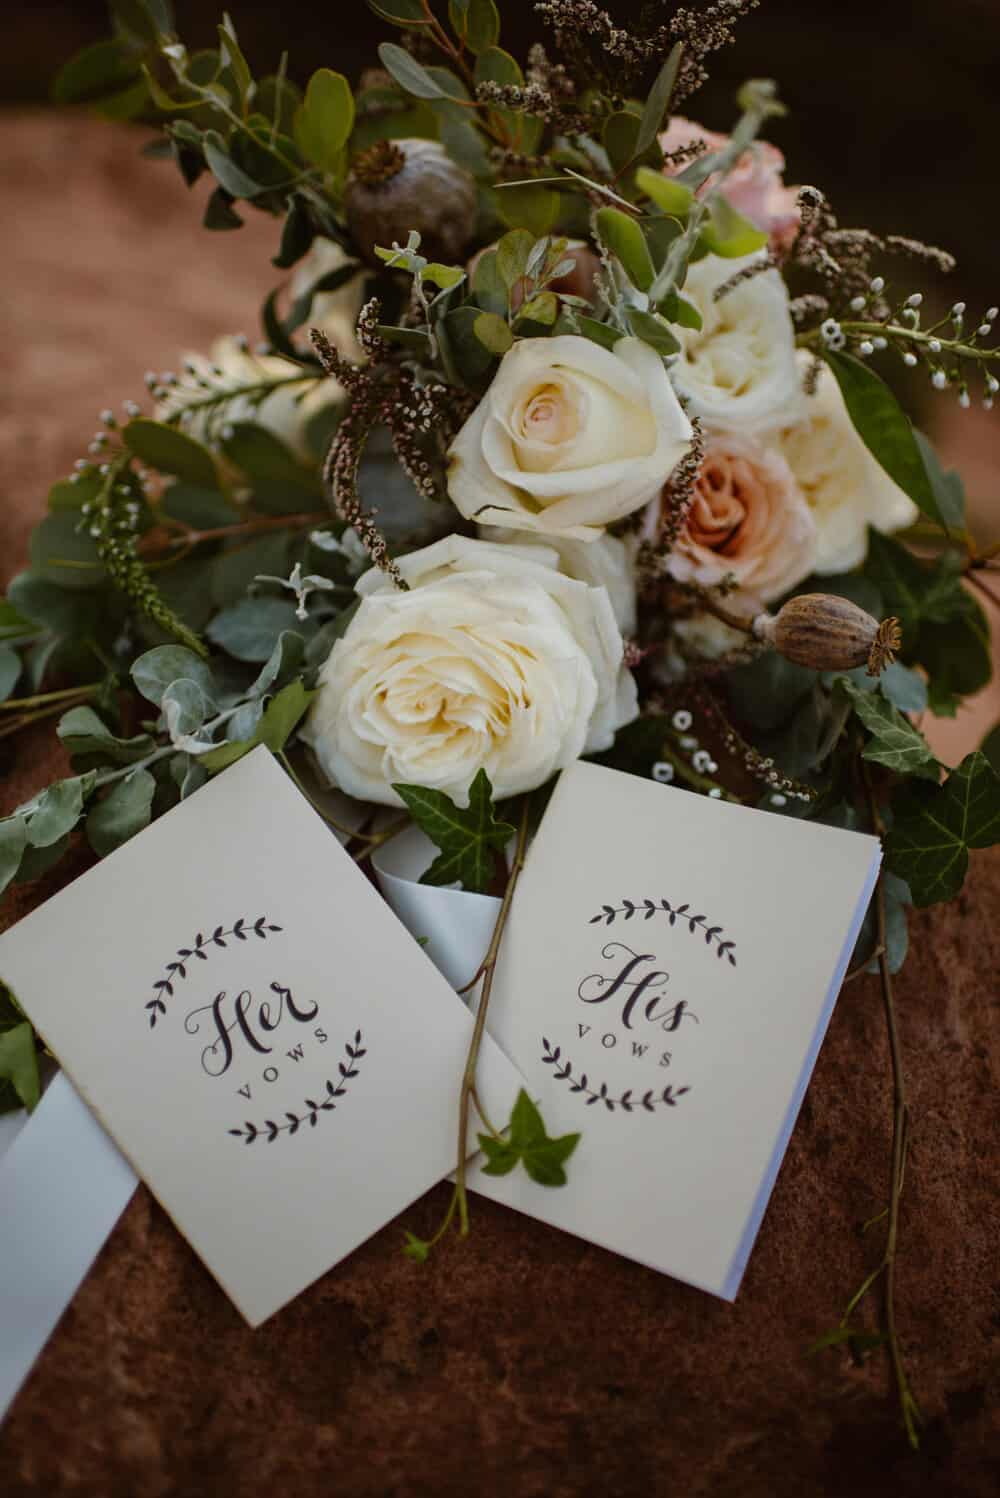 A floral bouquet and the bride and grooms vow books placed together for a styled image.